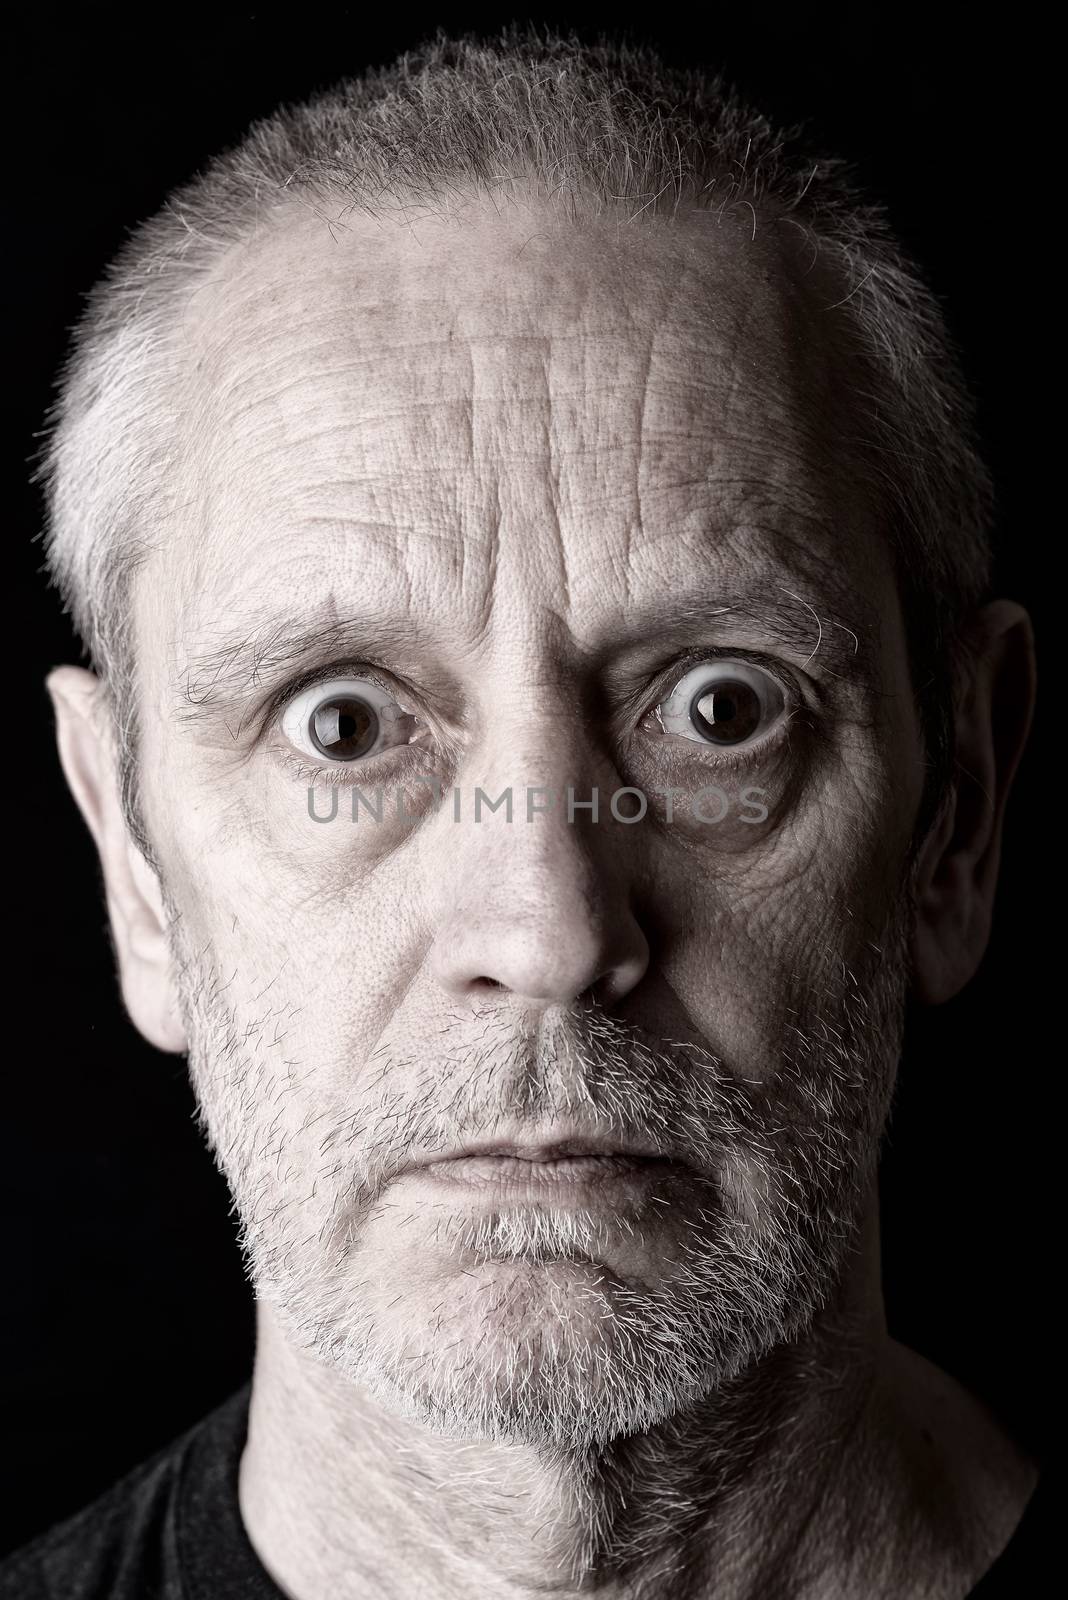 Portrait of an Angry and Surprised Man by MaxalTamor